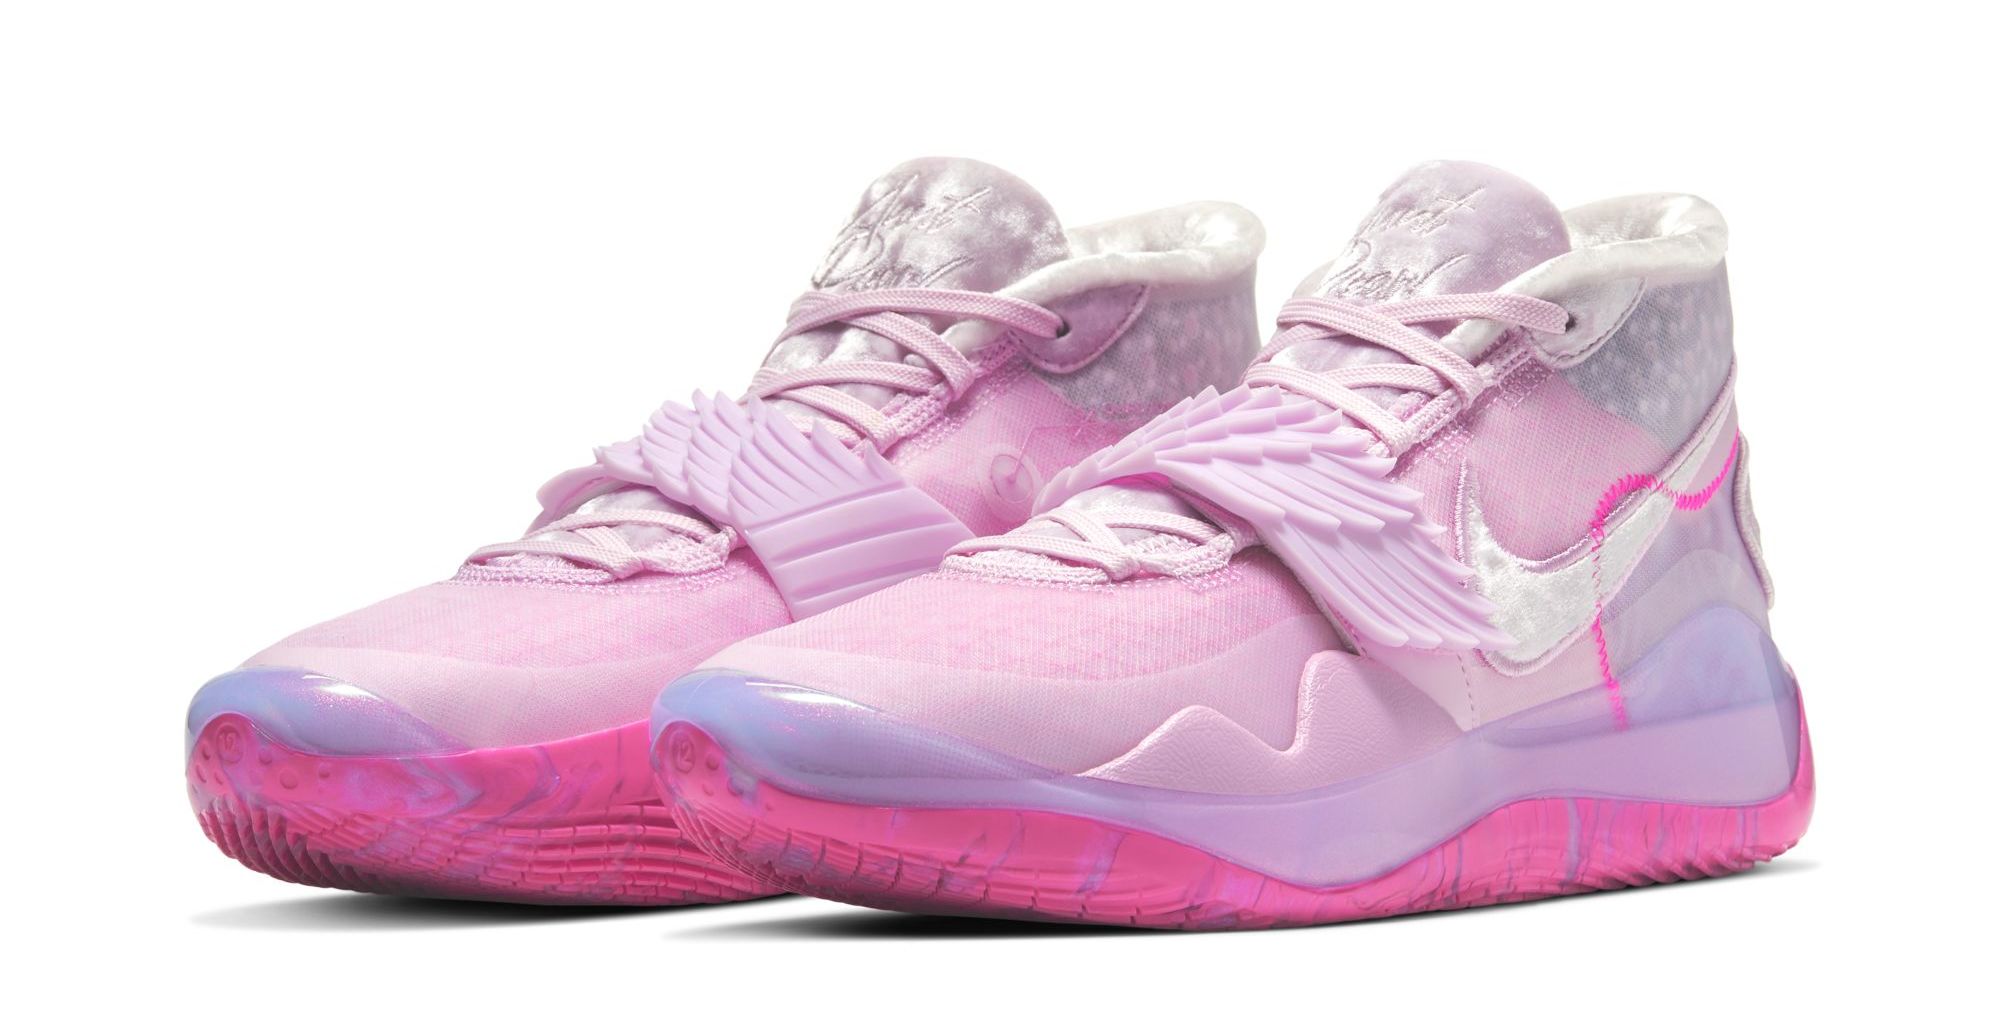 aunt pearl kd 5